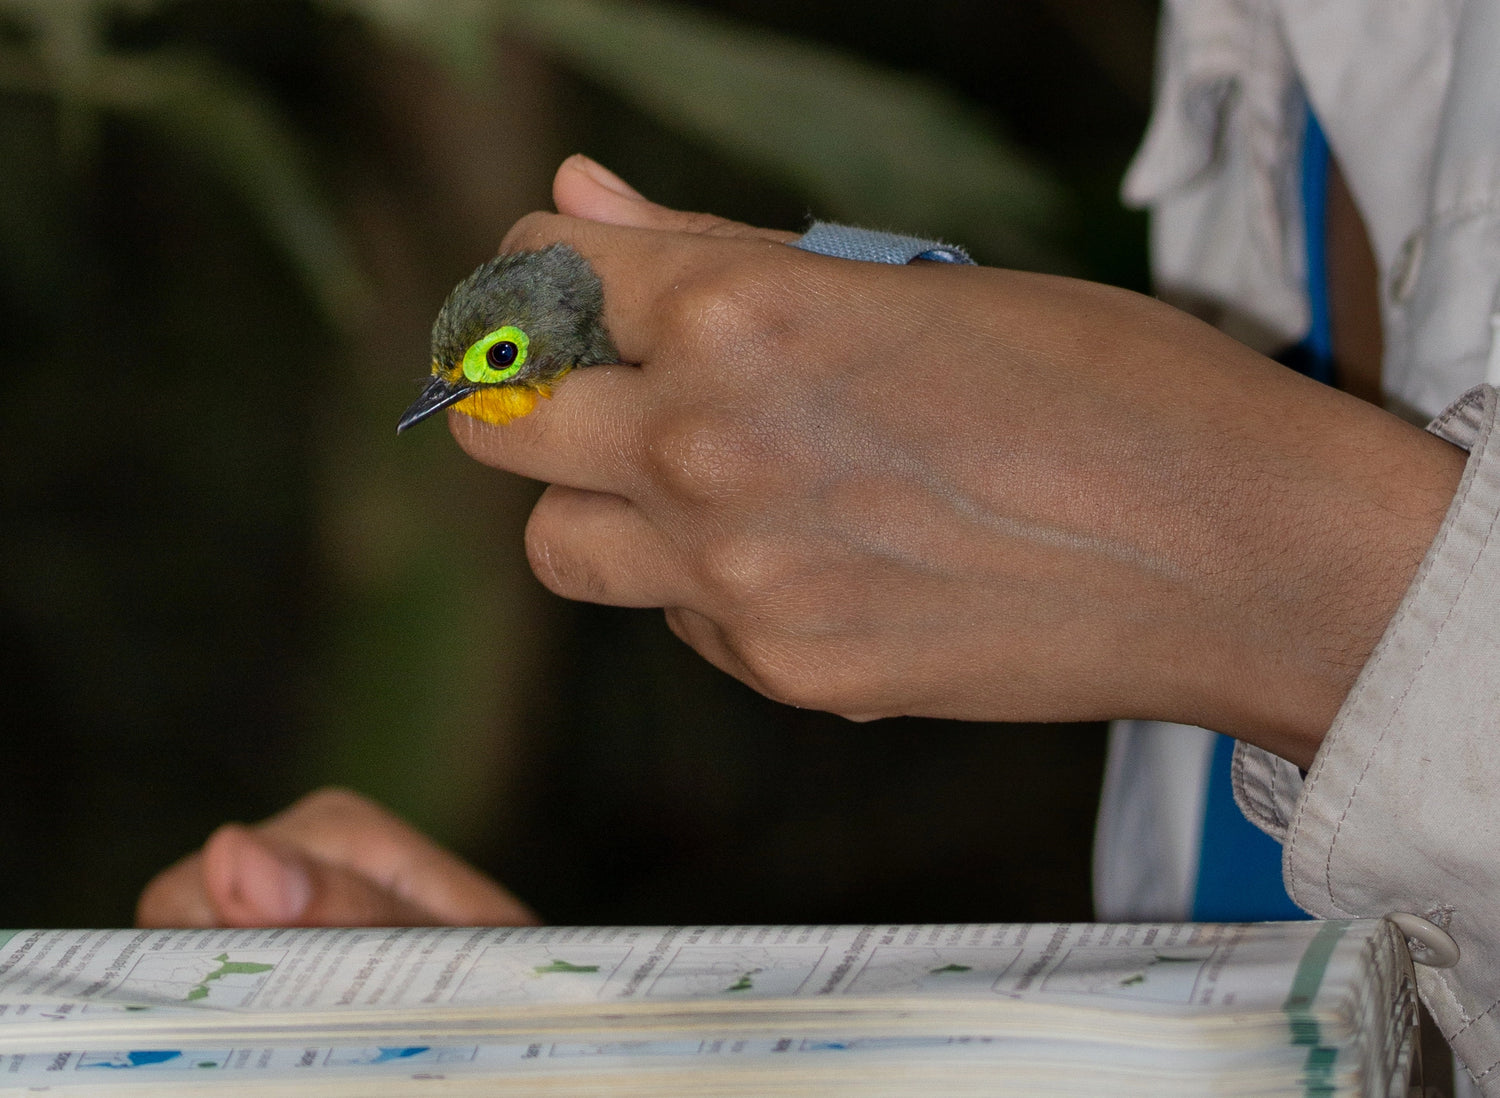 An ornithologist gently holds a small Yellow-bellied Wattle Eye while consulting a field guide. This close-up image highlights the detailed study of birds, emphasizing ornithology, birding, and bird watching. The scene reflects the naturalist ethos of BIRD CLUB and their commitment to being a sustainable brand, promoting eco-friendly birding practices.